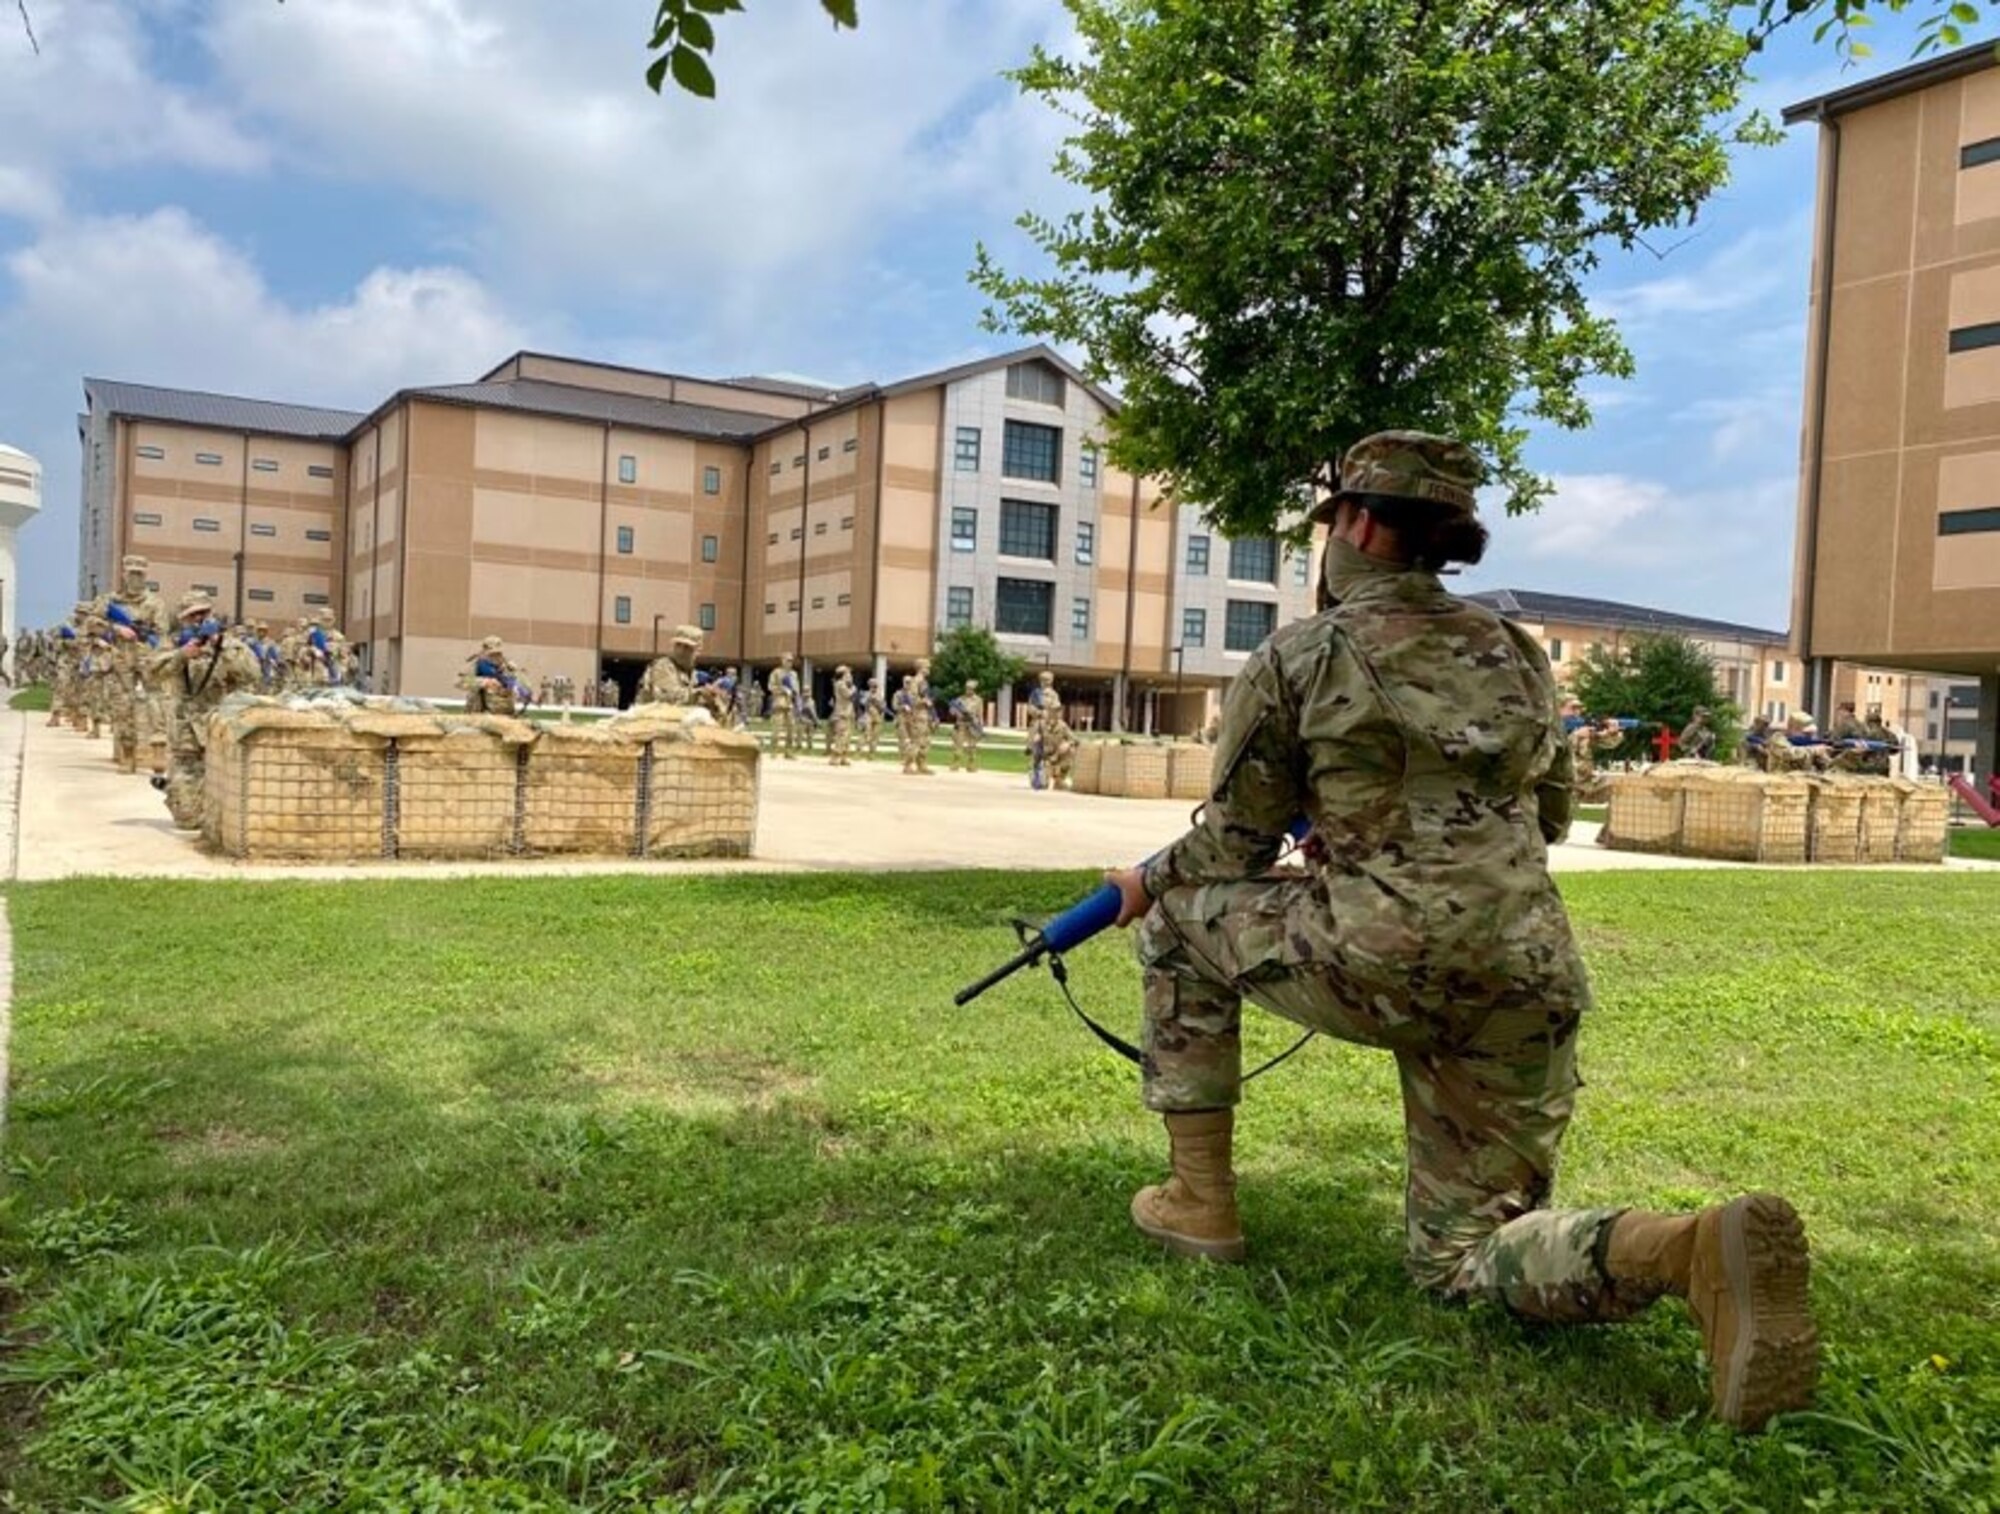 Trainees in basic military training (BMT) learn defensive fighting positions in preparation for BEAST (Basic Expeditionary Airman Skills Training) on Joint Base San Antonio-Lackland, Texas, April 8. This was the first day mask wear was implemented at BMT as a required safety measure during the COVID-19 pandemic.